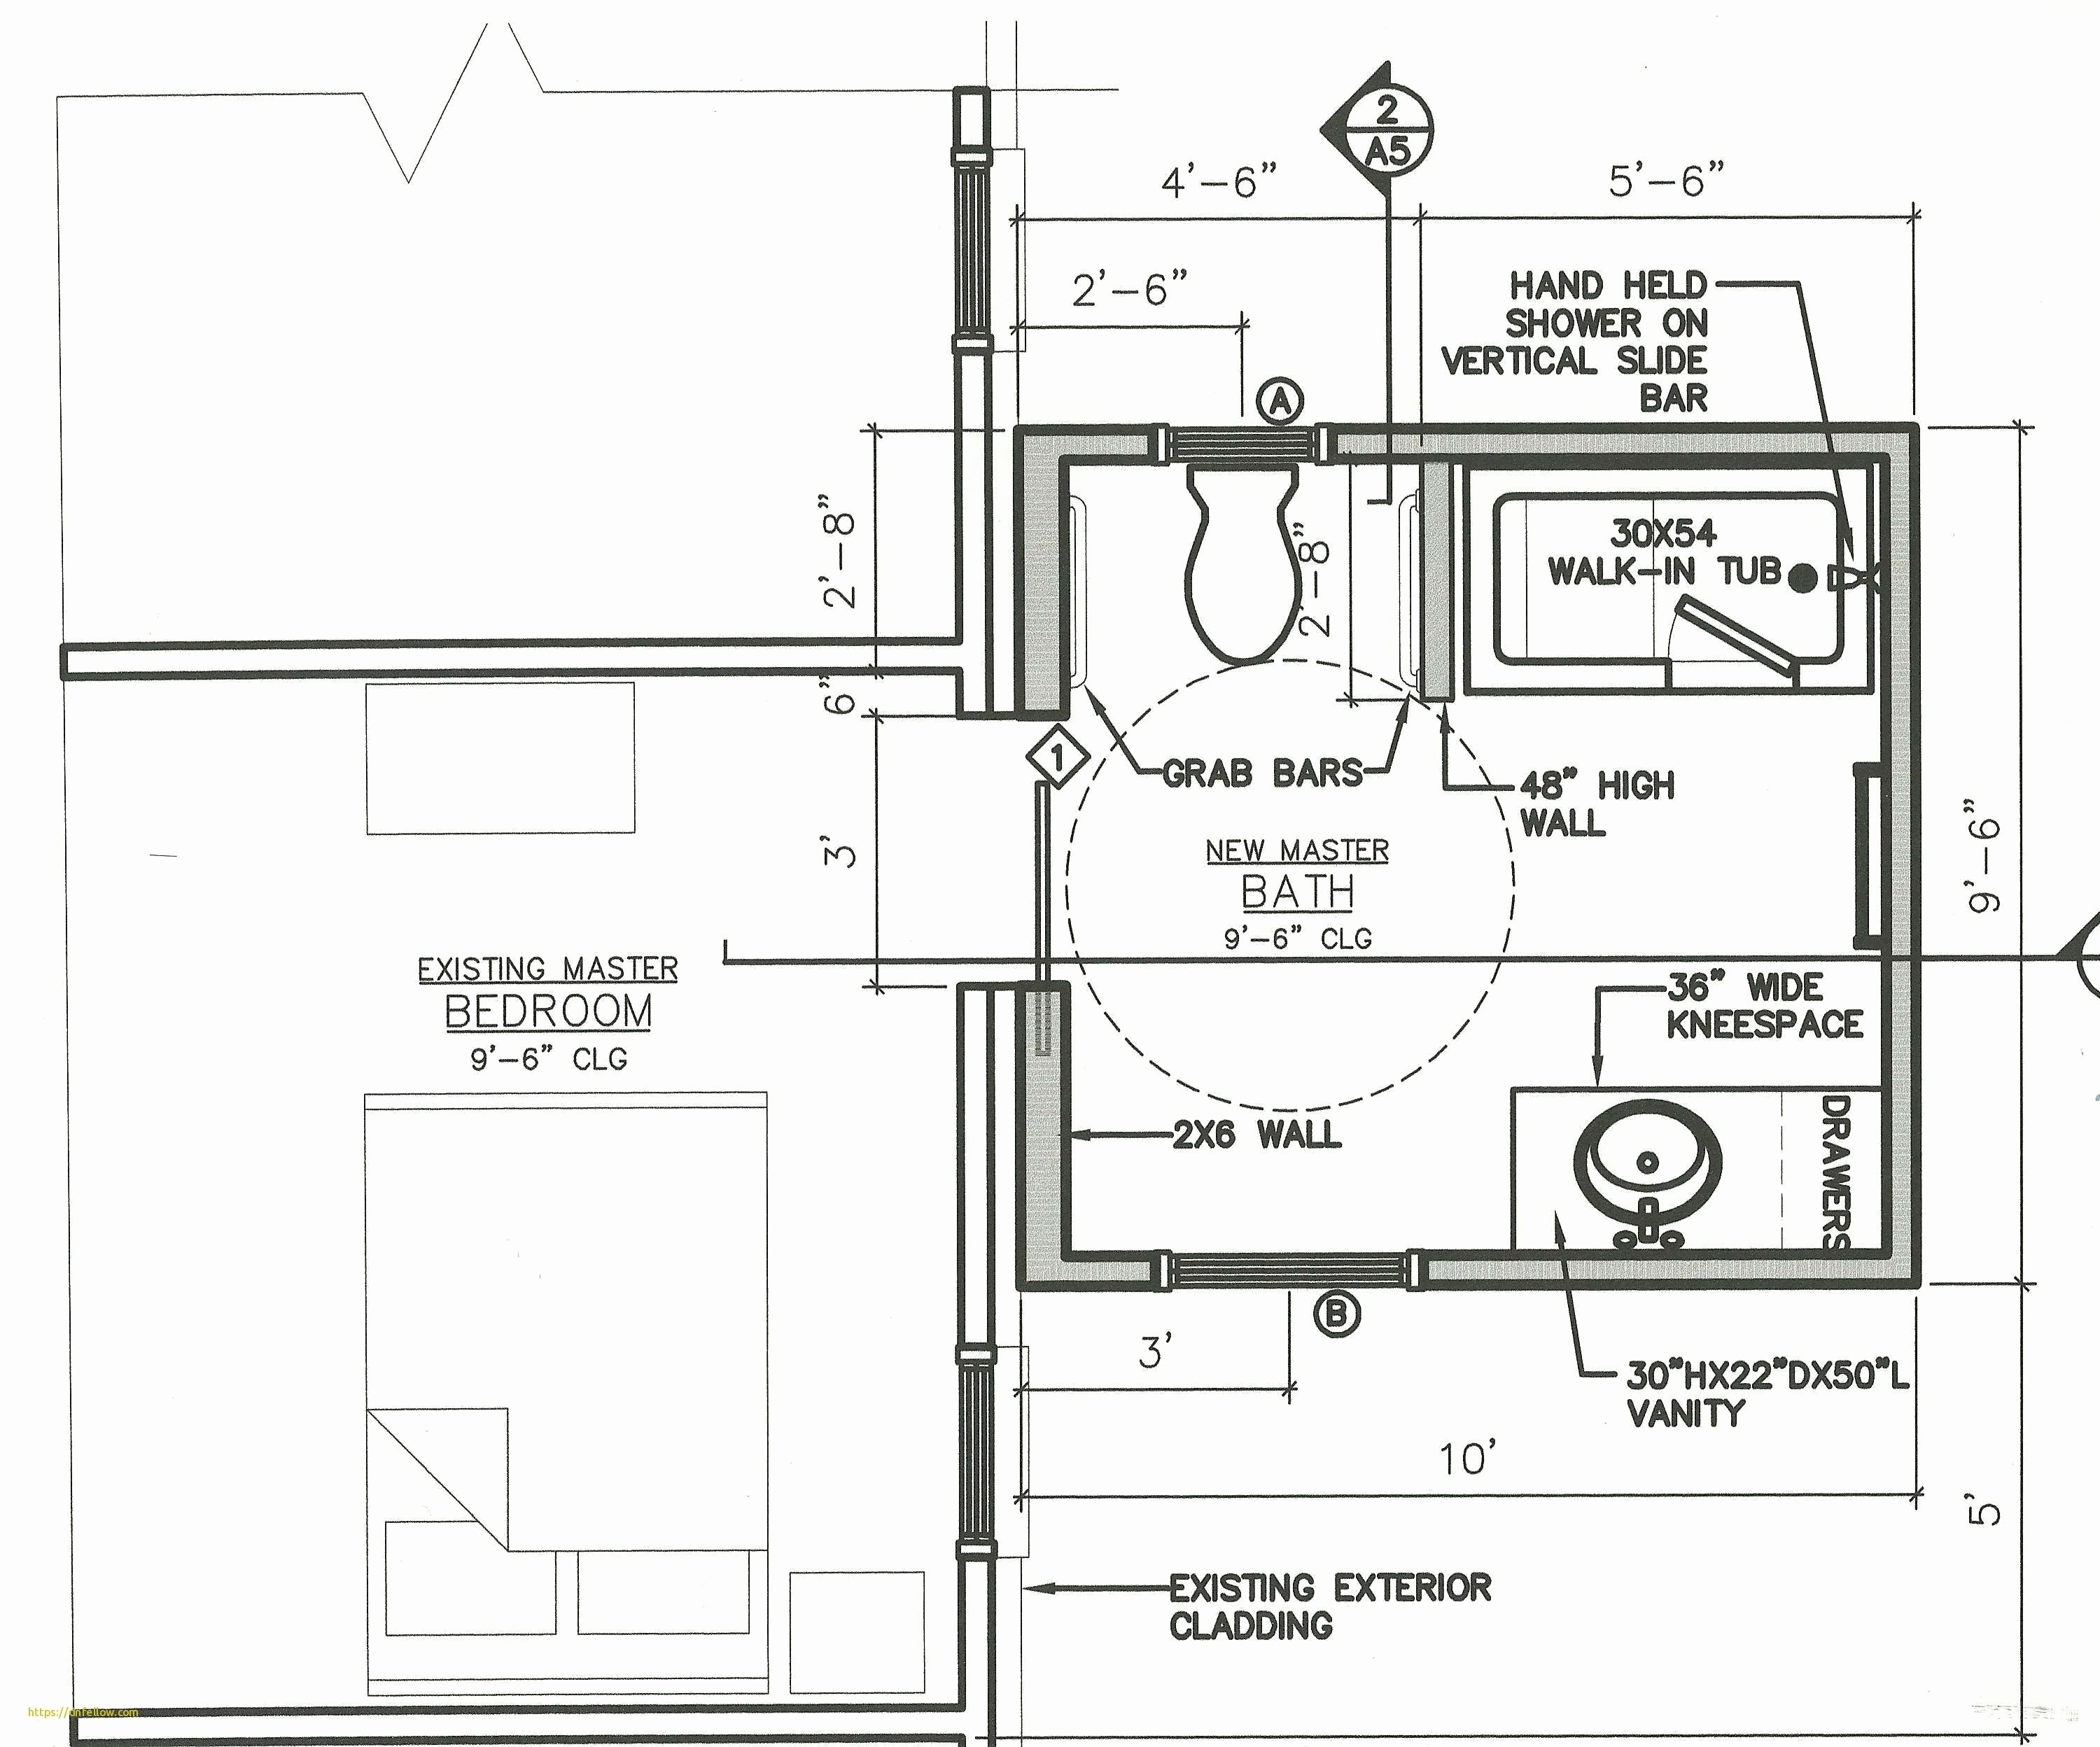 apartment floor plans with dimensions fresh 30 beautiful loft apartment floor plan line floor plan design of apartment floor plans with dimensions